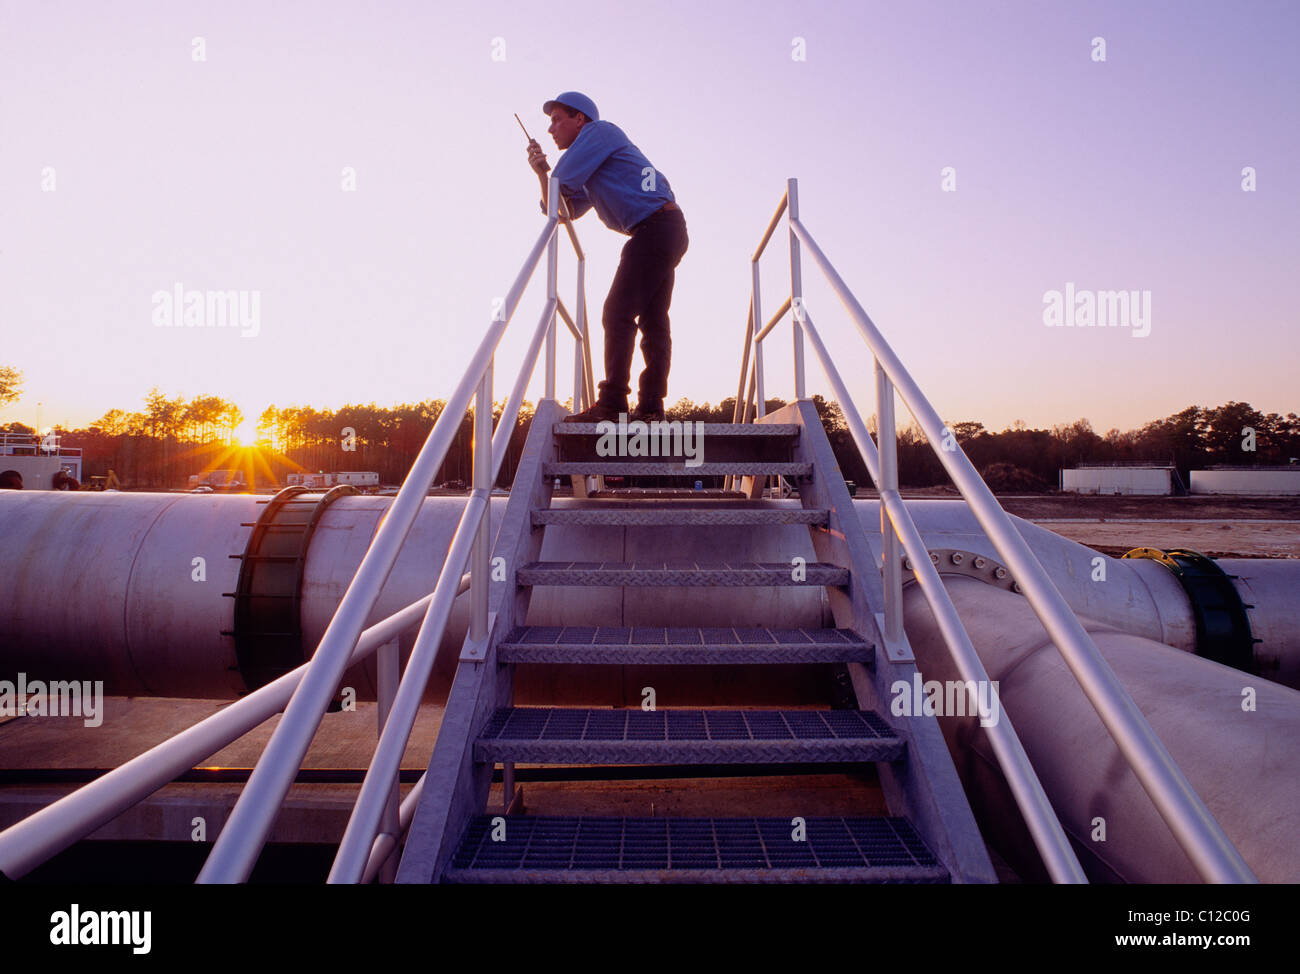 Engineer on a walkie talkie radio at sunset at a waste water treatment plant, Houston, Texas, USA Stock Photo